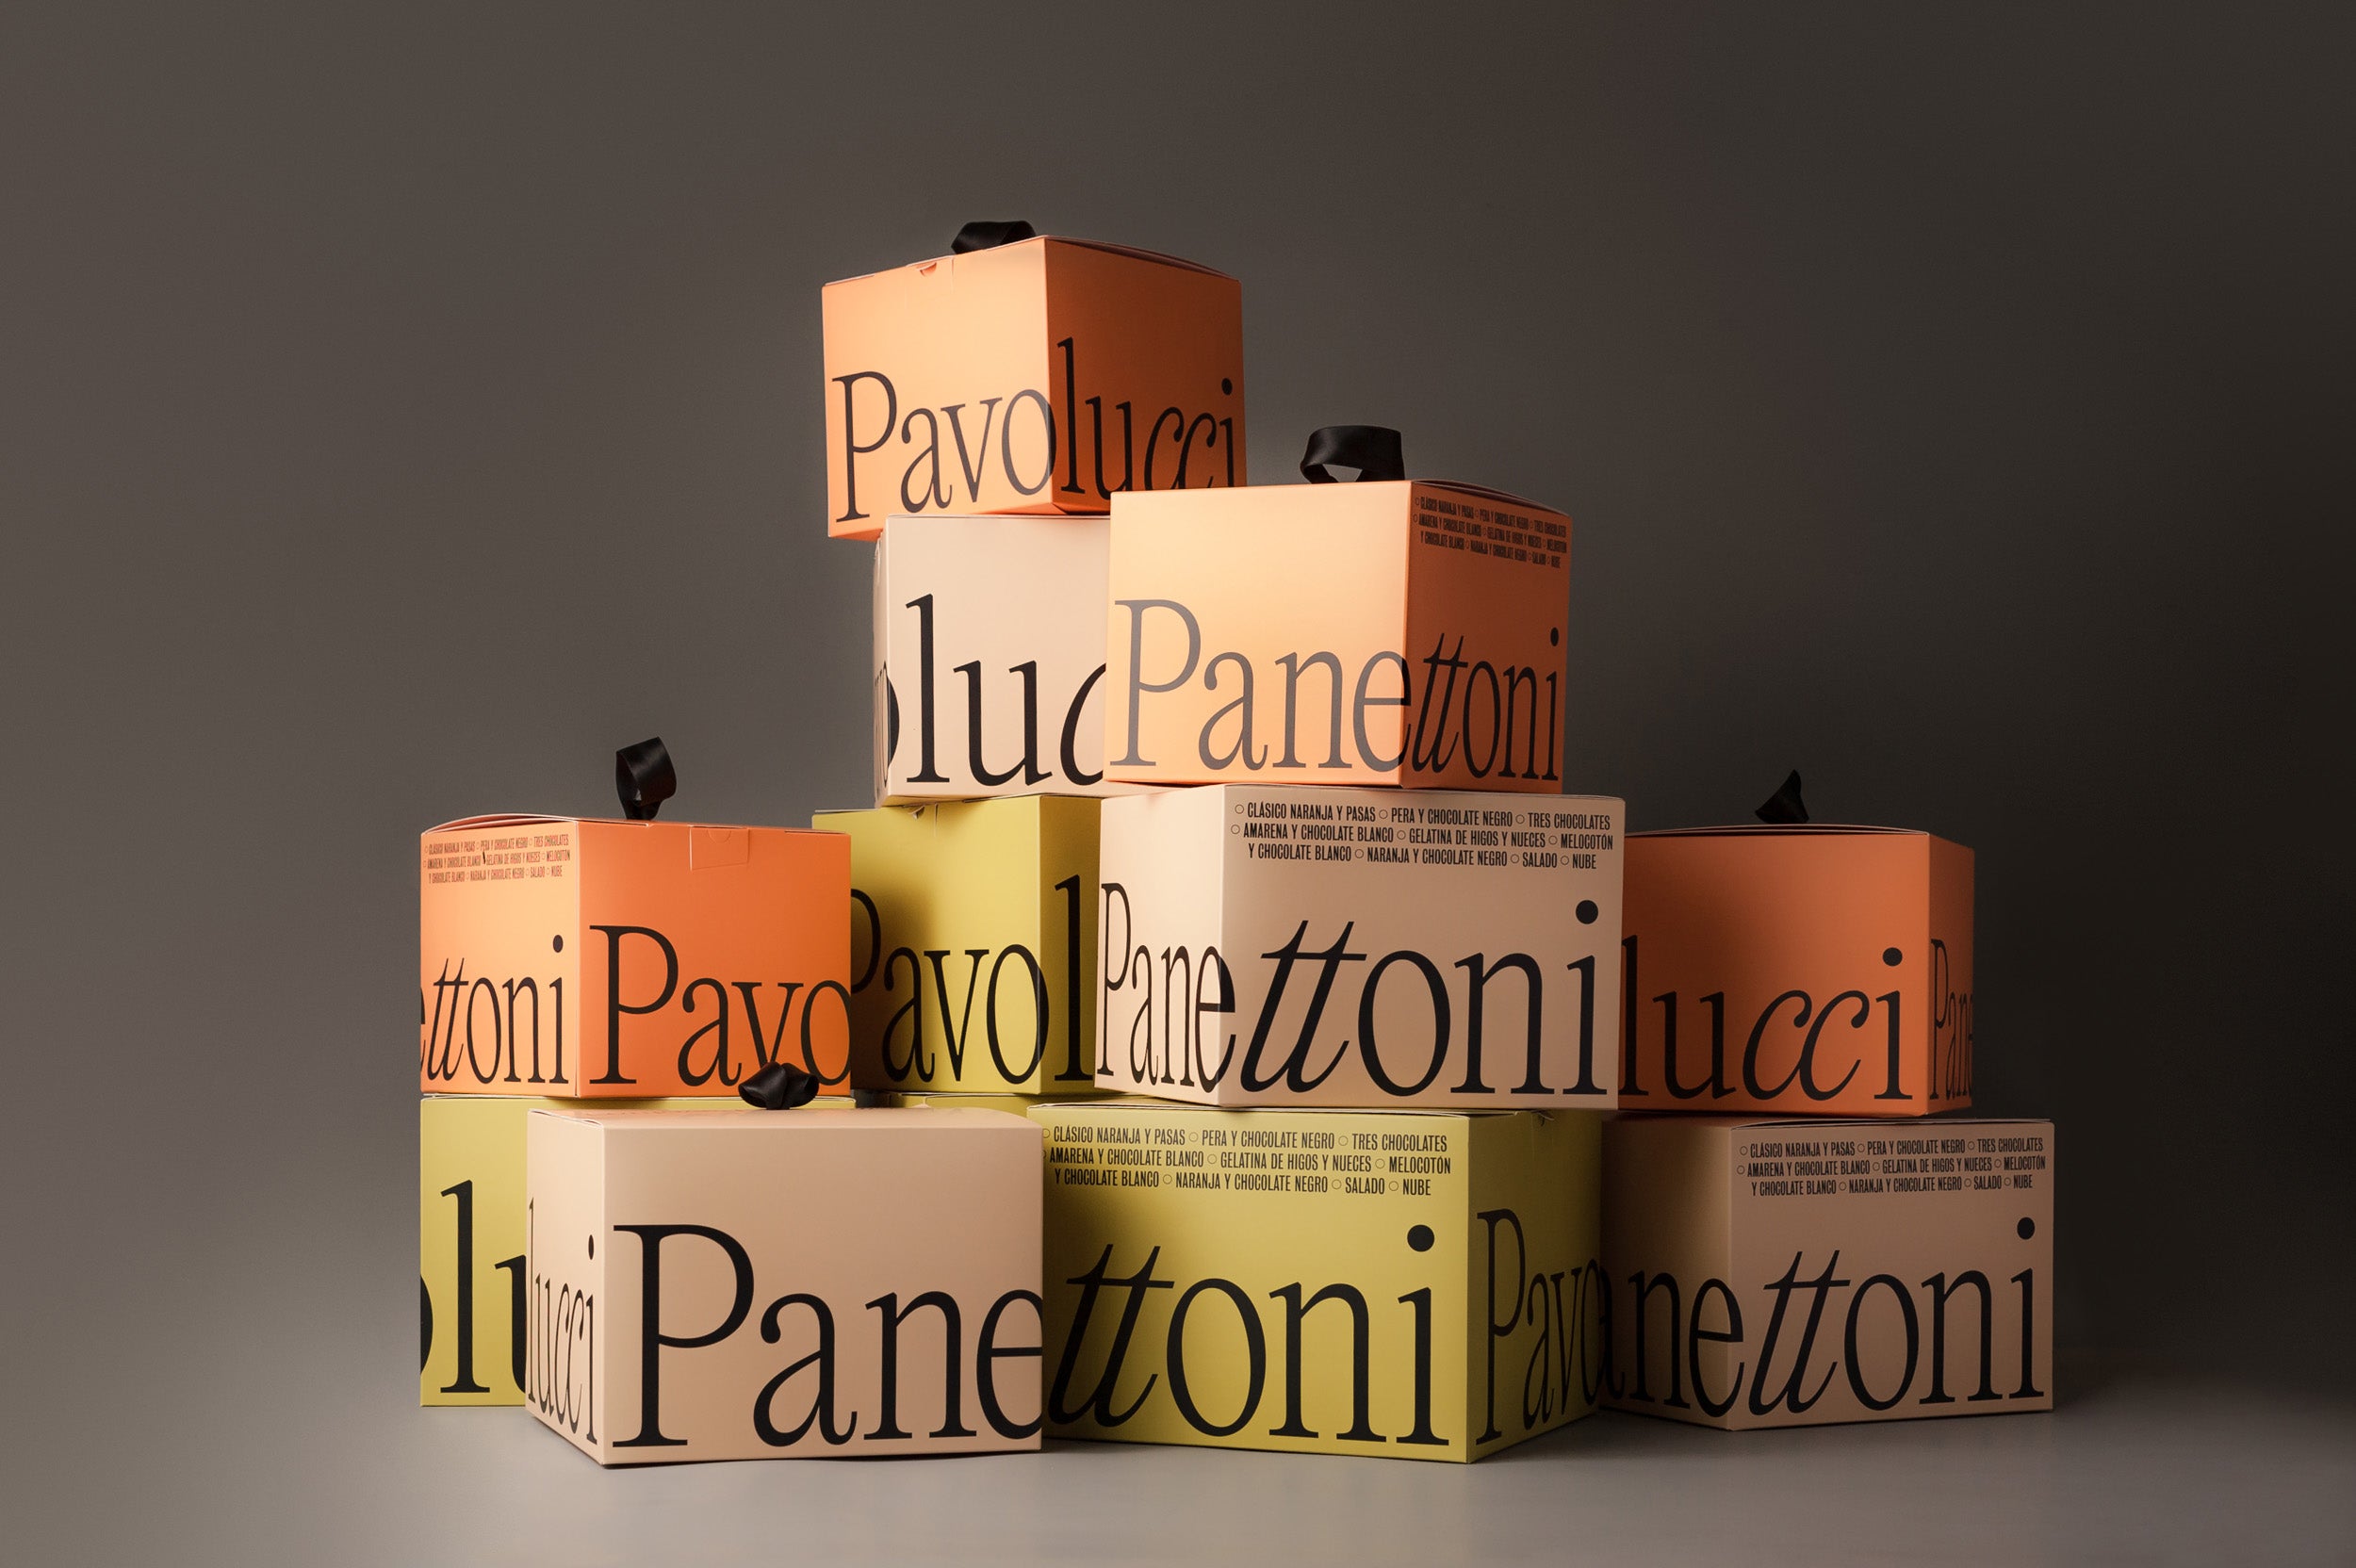 Panettone packaging design by Requena for Spanish brand Panettoni Pavolucci